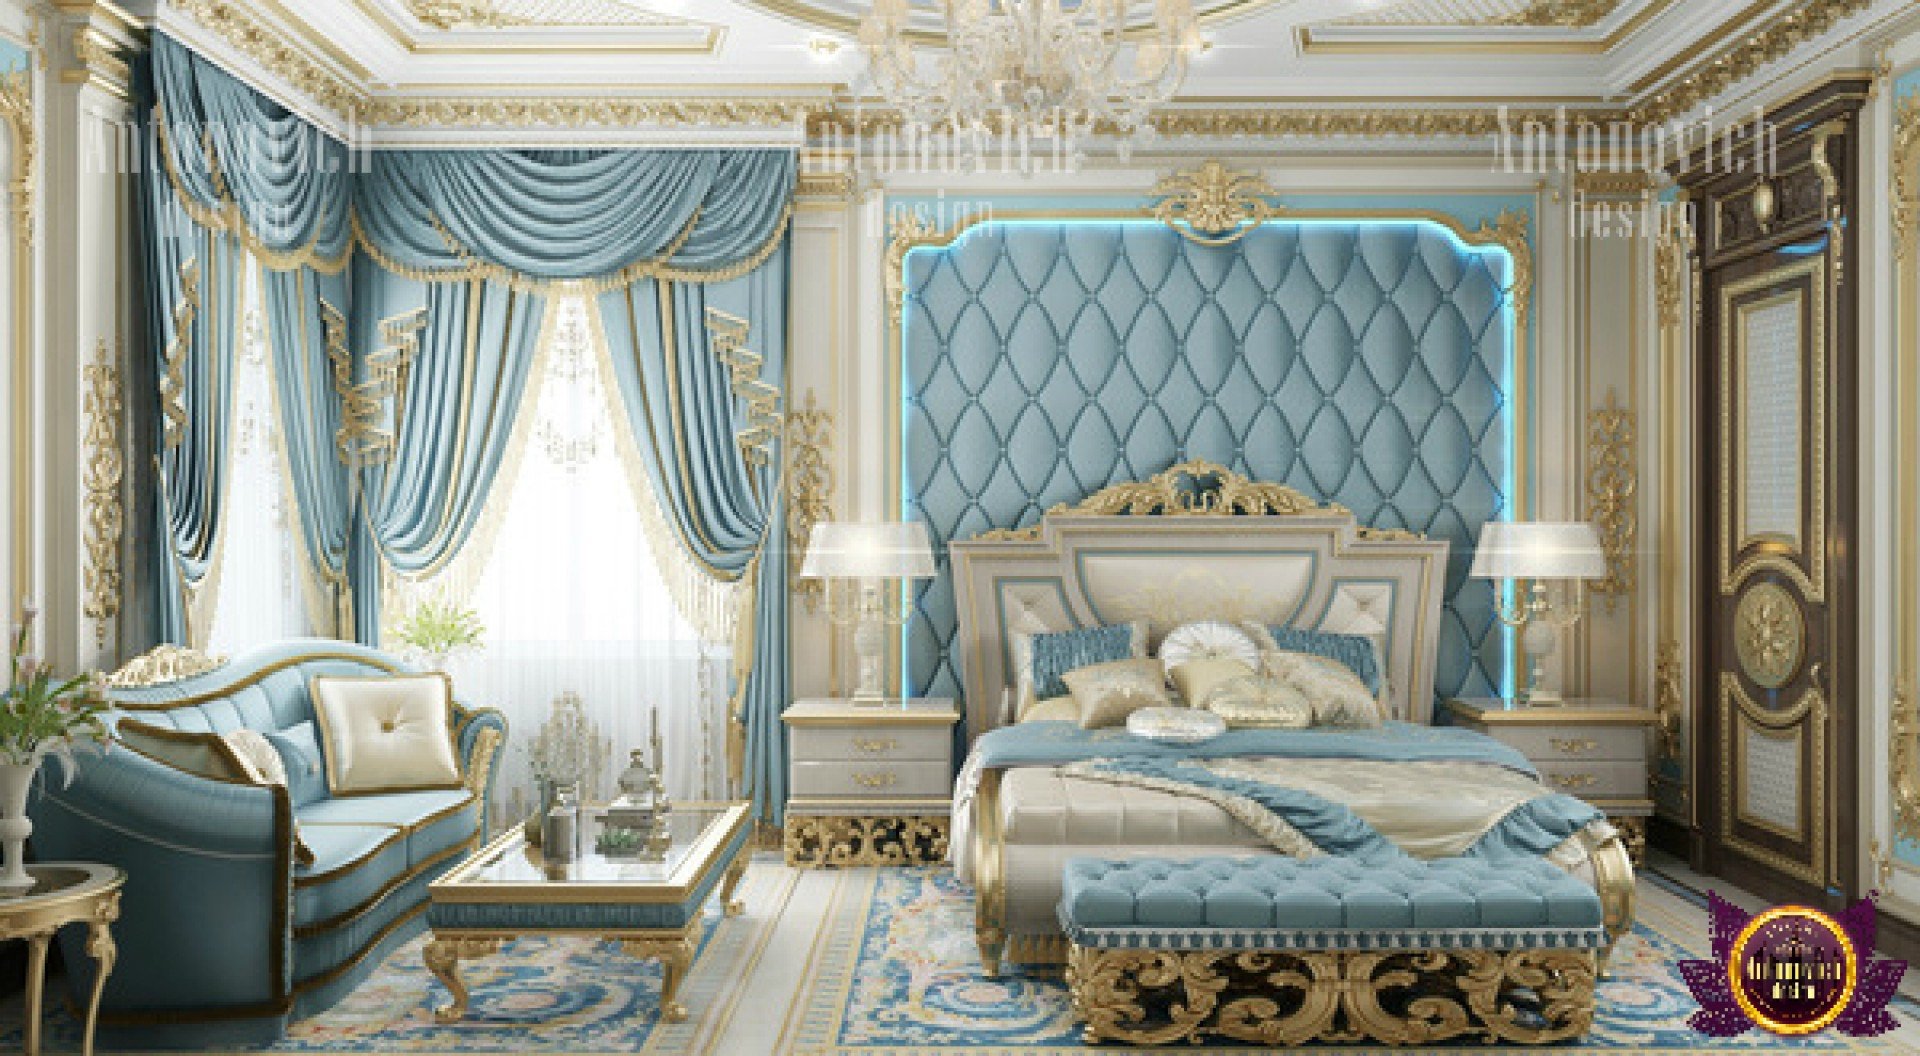 Elegant king-sized bed with luxurious linens and plush pillows